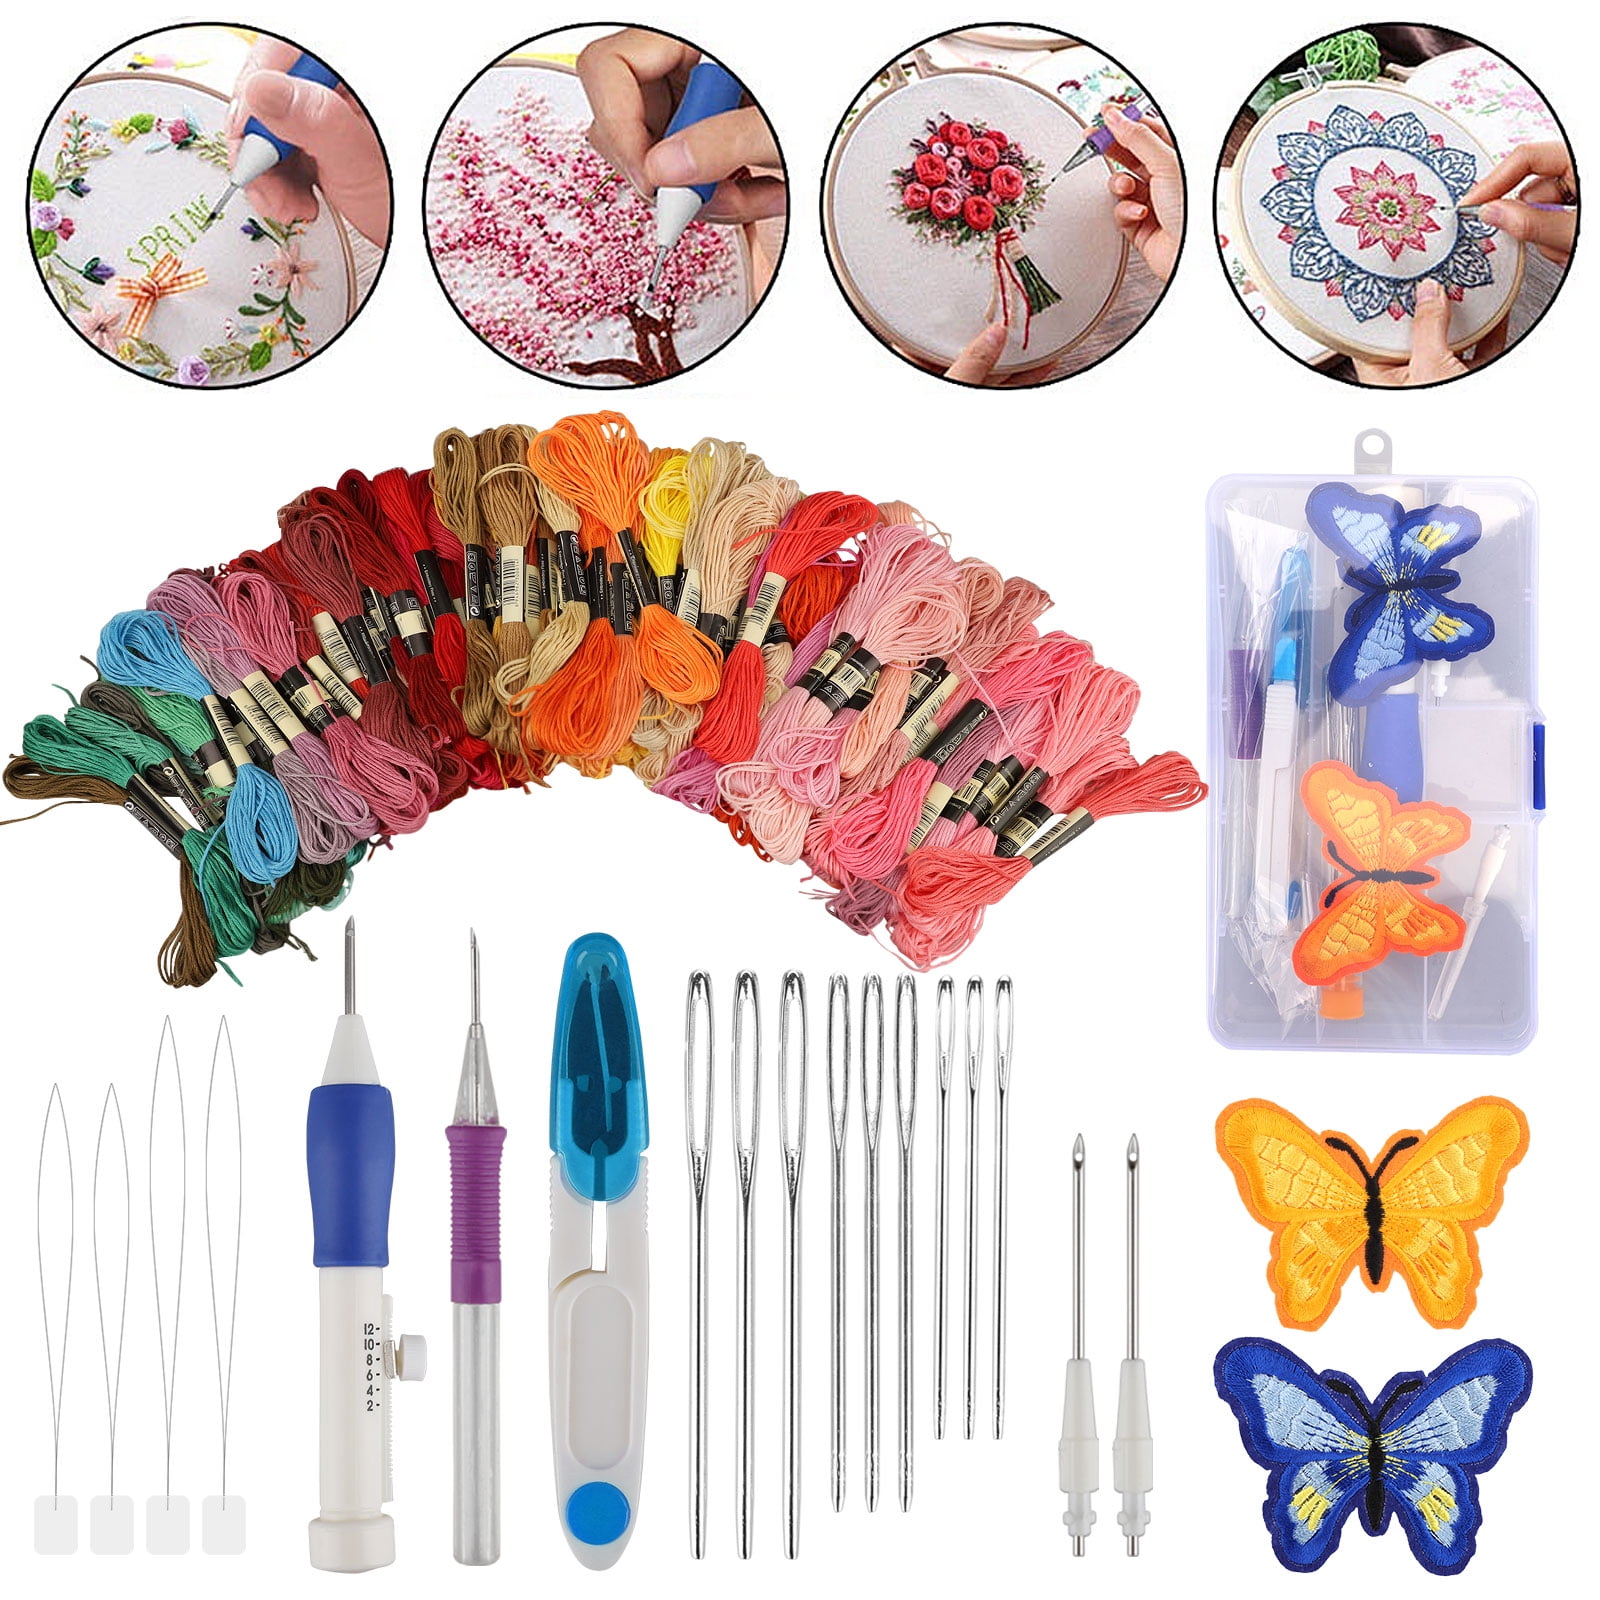 Scenery 1 Scenery Rug Hooking Kit Needle Embroidery Starter Kits Threader Fabric Embroidery Needles Stitching Pen Set Craft Tool fit for Beginner 